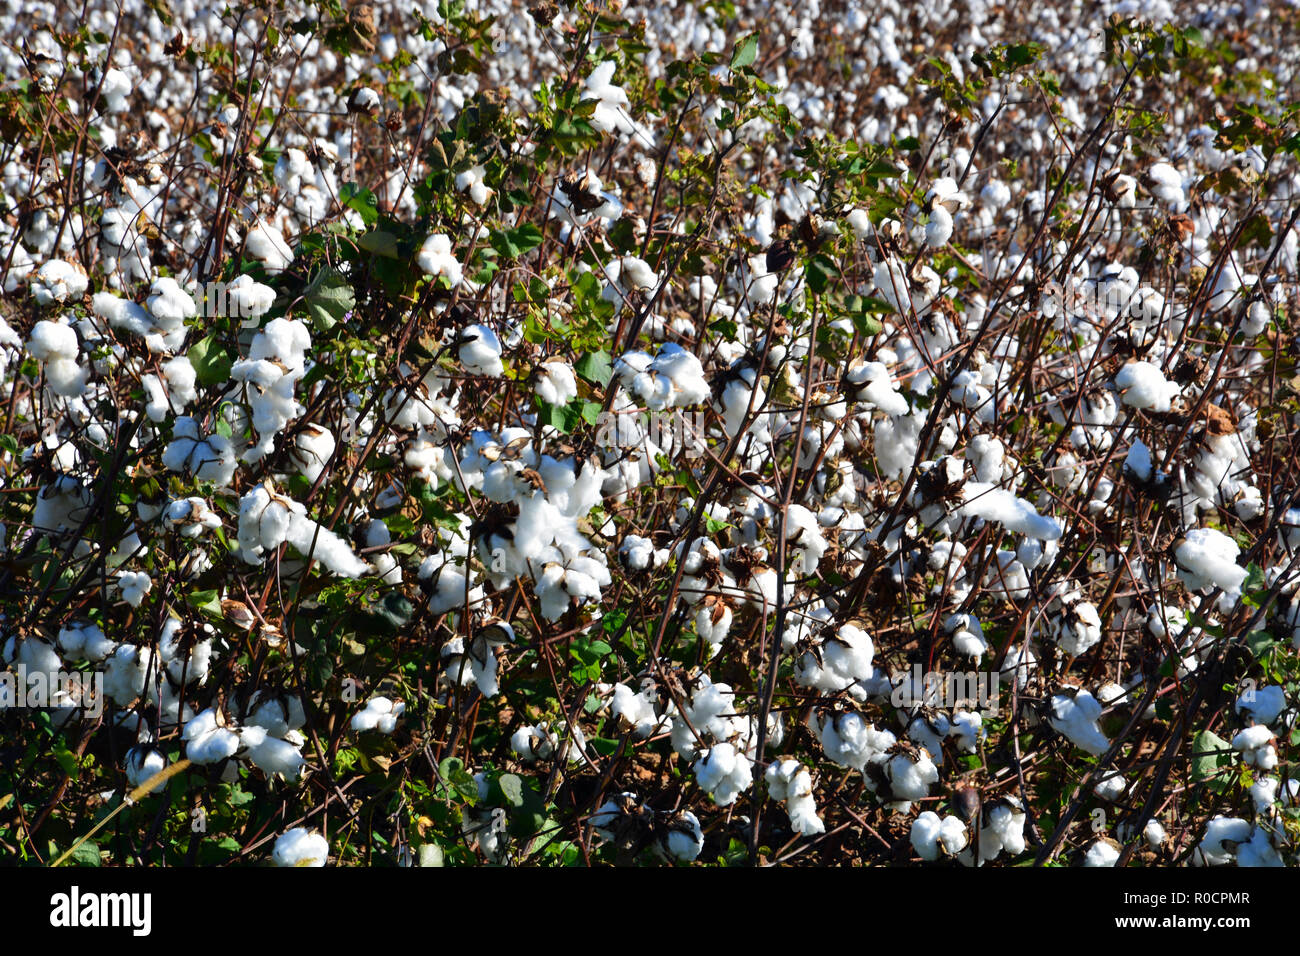 A cotton field is ready for harvest along highway 64 in Martin County North Carolina. Stock Photo